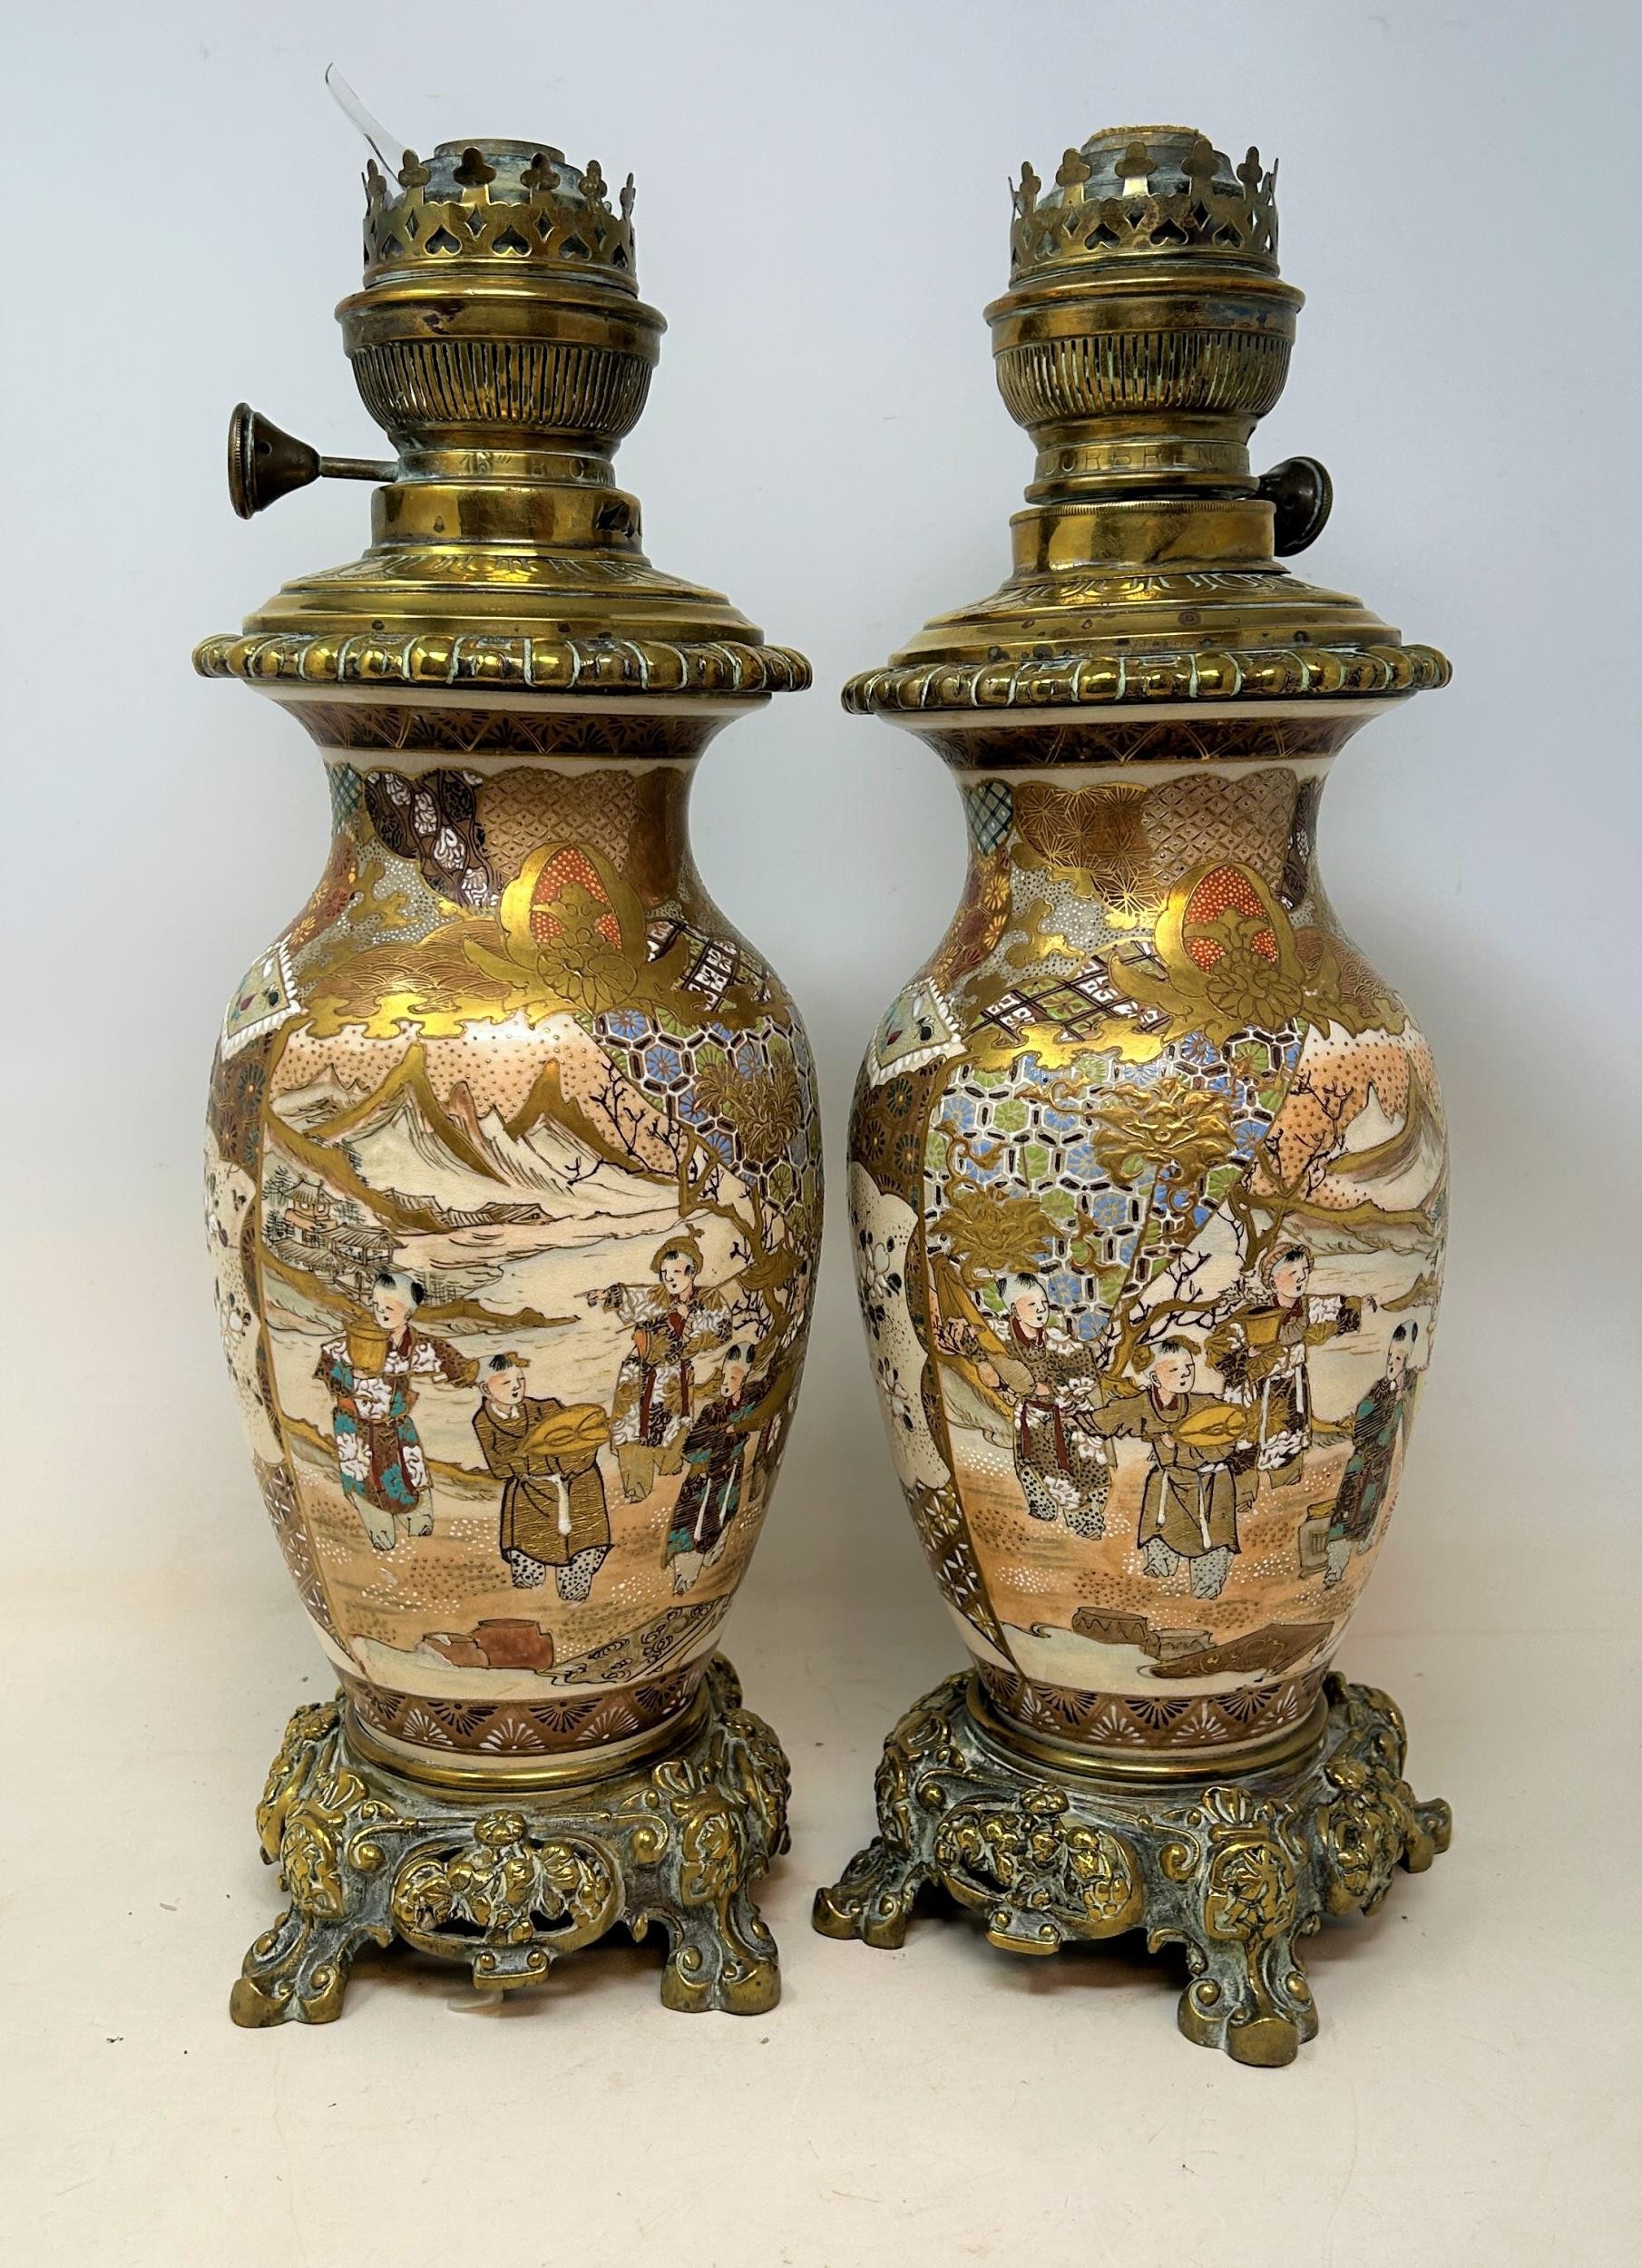 A pair of Satsuma vases, converted to oil lamps, with brass mounts, and glass chimneys, 64 cm high